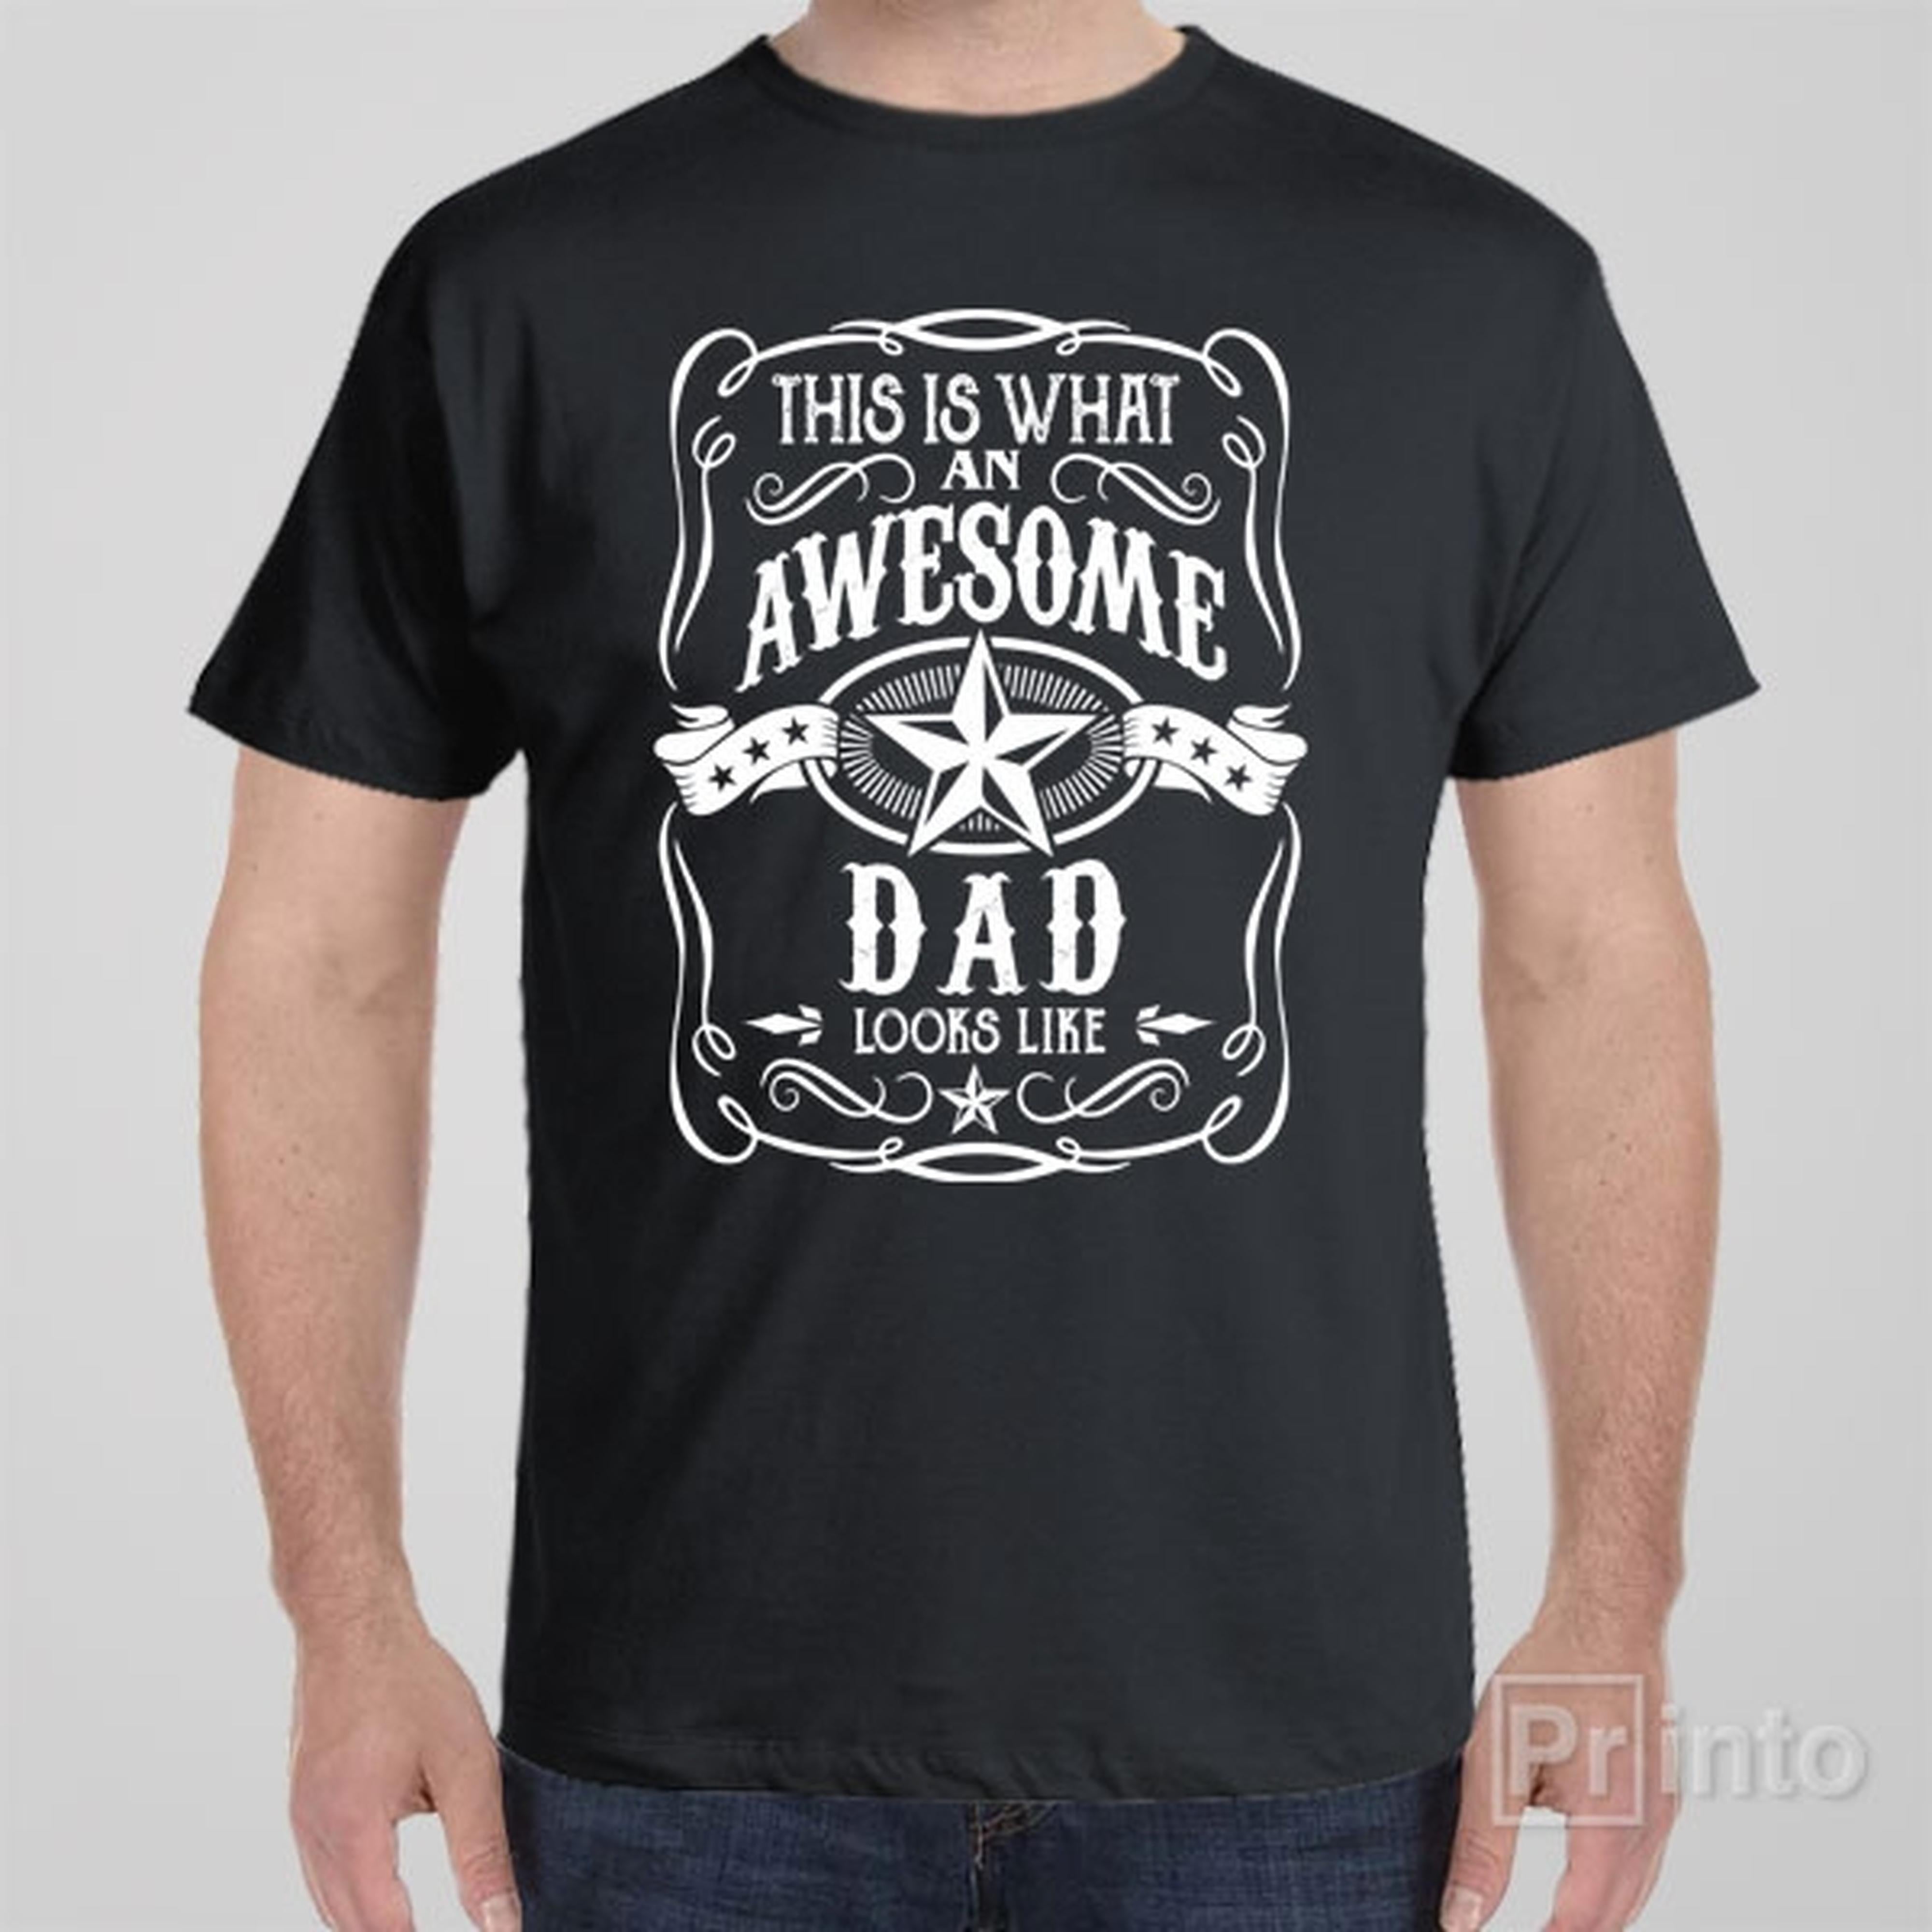 this-is-what-an-awesome-dad-looks-like-t-shirt